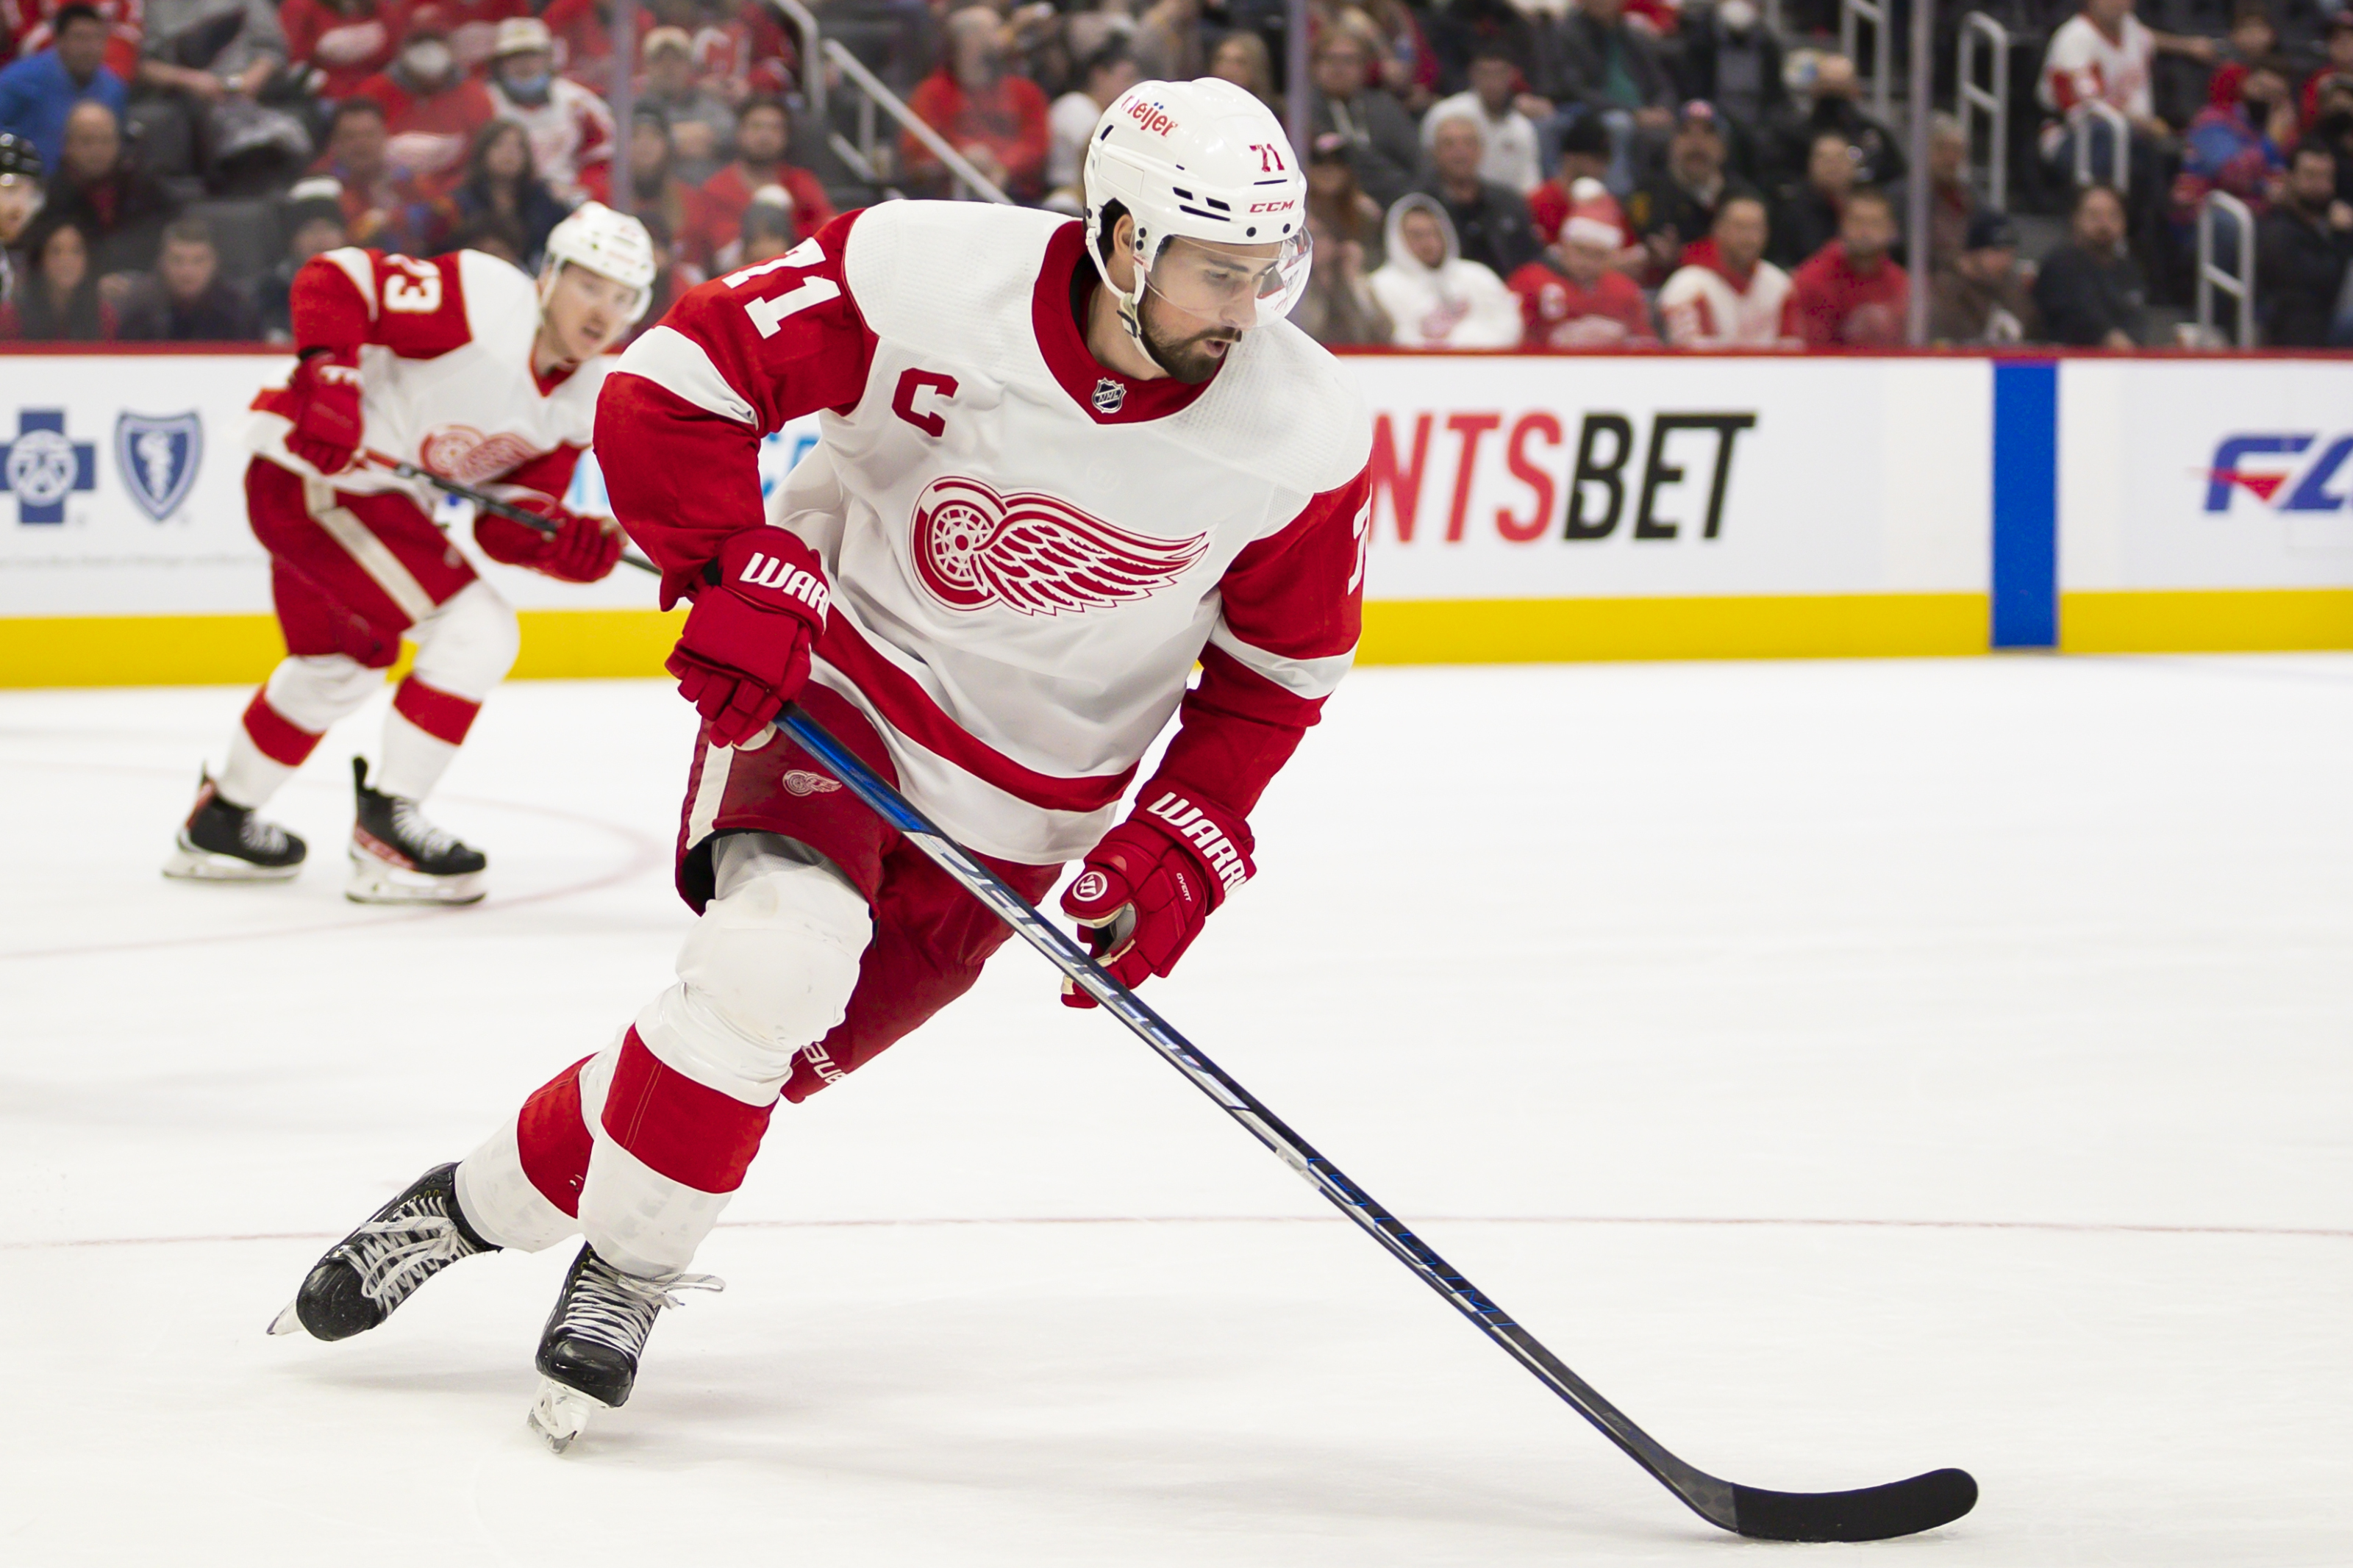 No 2022 All-Star Game for Detroit Red Wings' Lucas Raymond